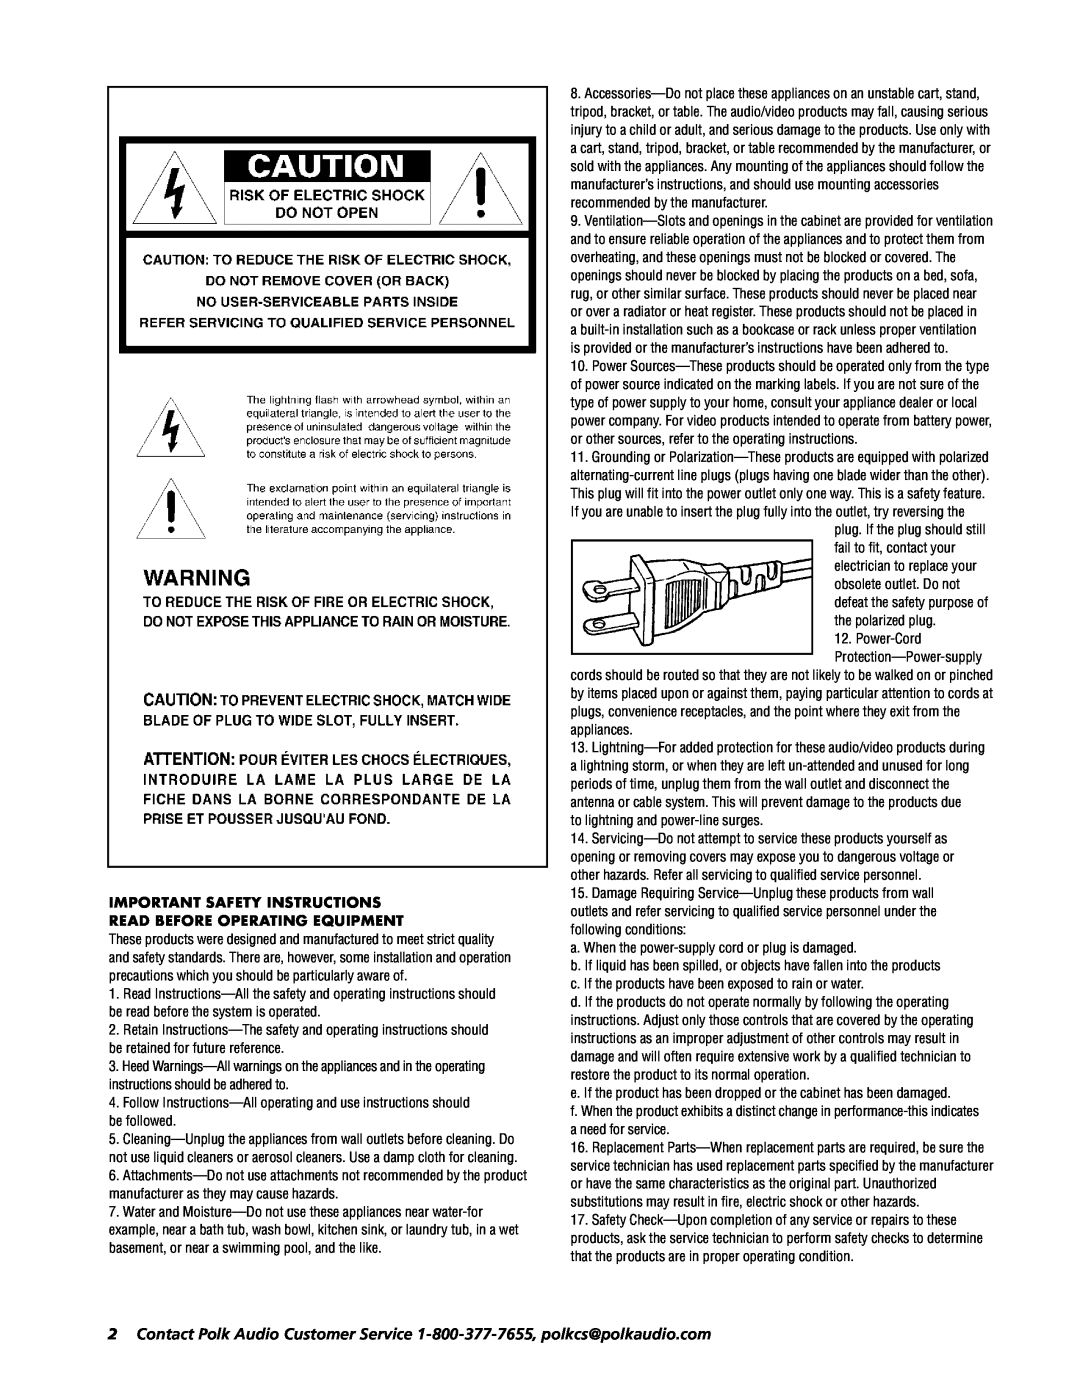 Polk Audio PSW202 owner manual Important Safety Instructions, Read Before Operating Equipment 